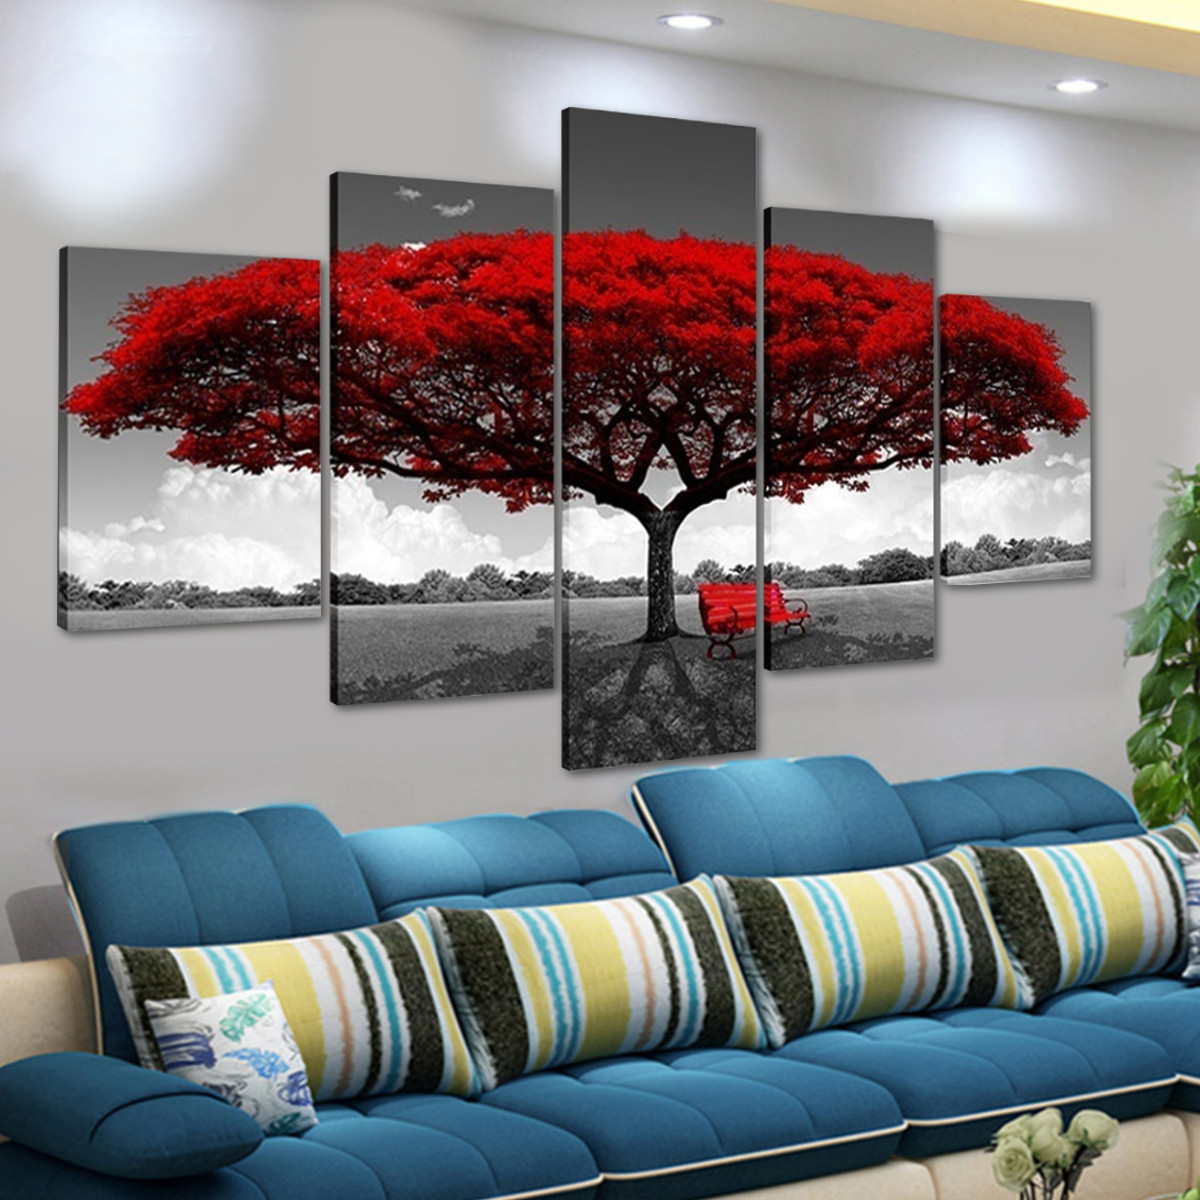 5Pcs-Red-Tree-Canvas-Paintings-Wall-Decorative-Print-Art-Pictures-Unframed-Wall-Hanging-Home-Office--1774551-9